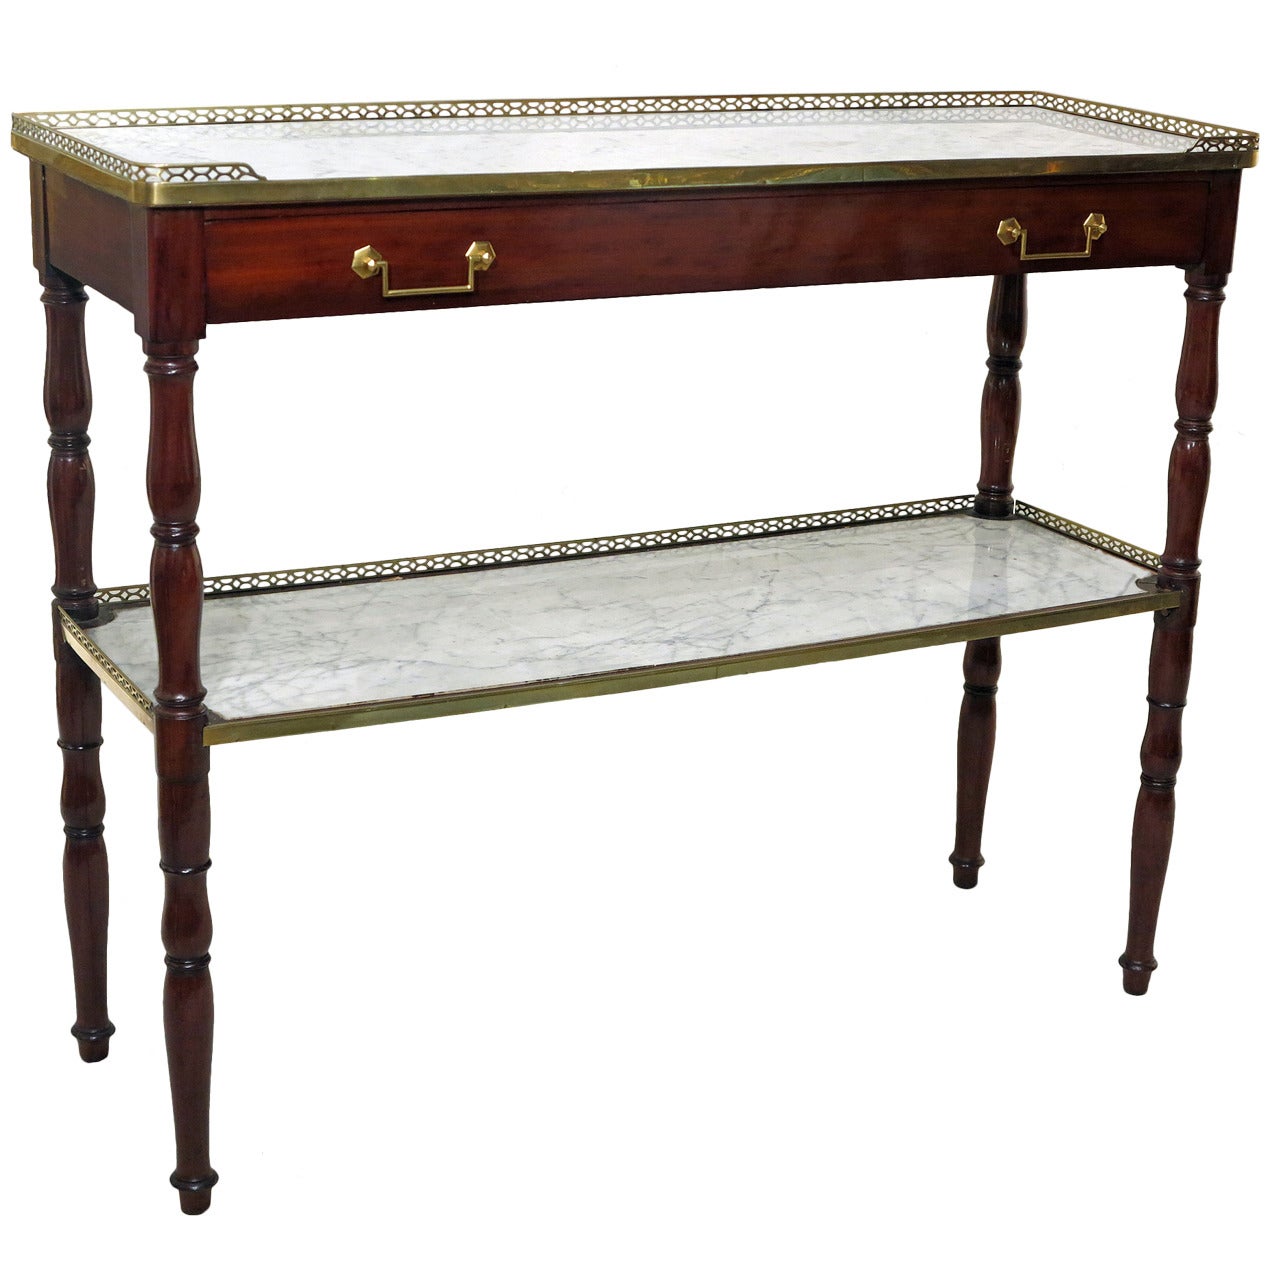 Fine and Rare Directoire Mahogany Console or Dessert Table by Jacob Rue Meslee